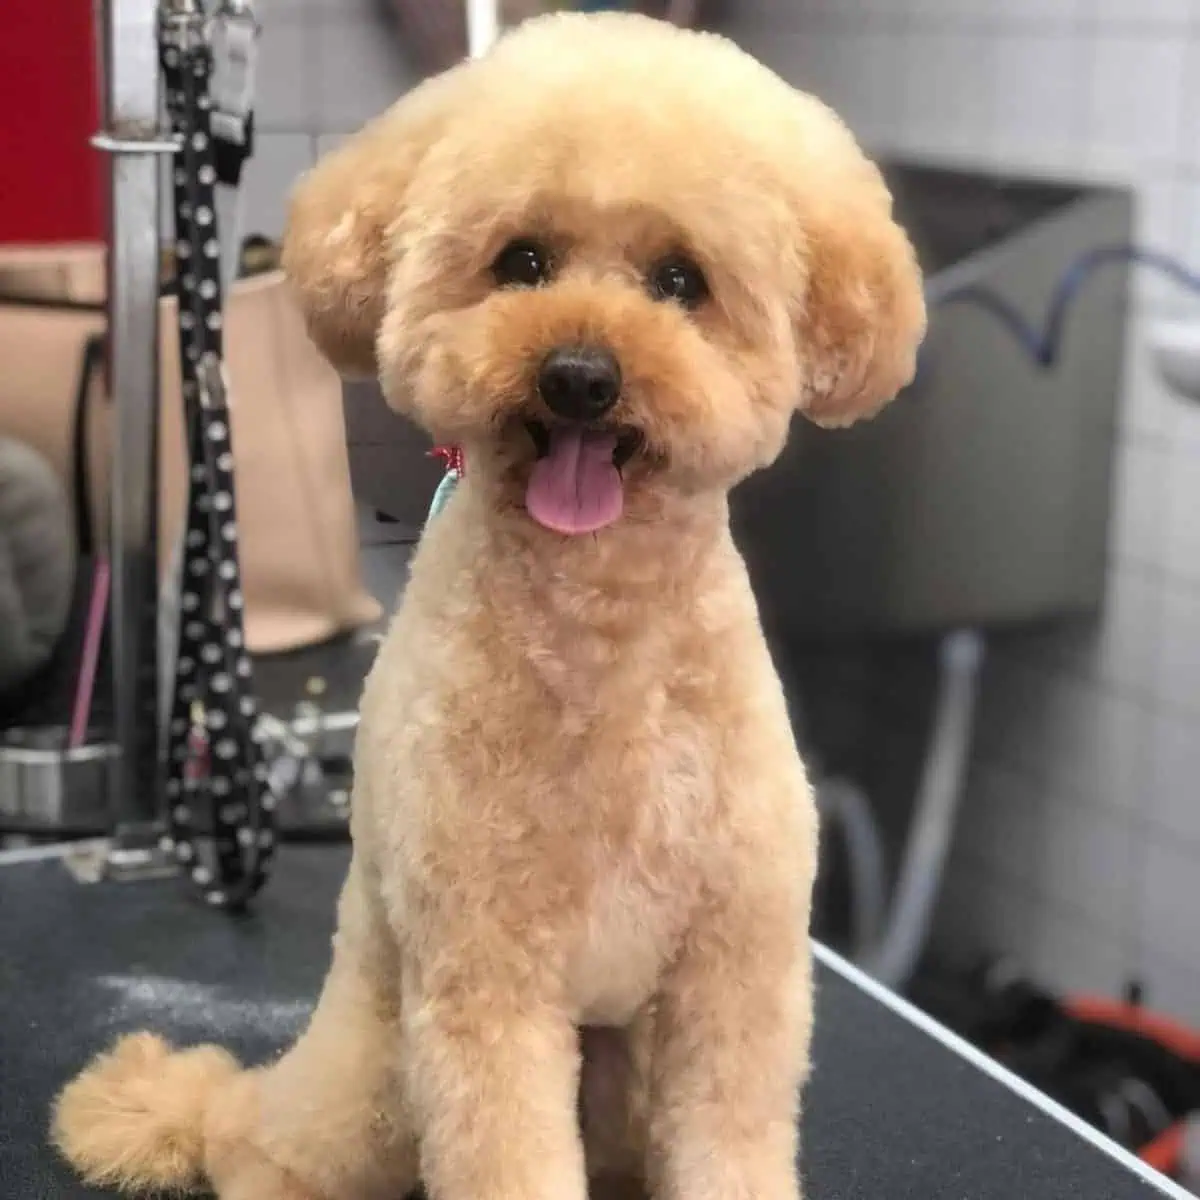 Poodle got his new haircut